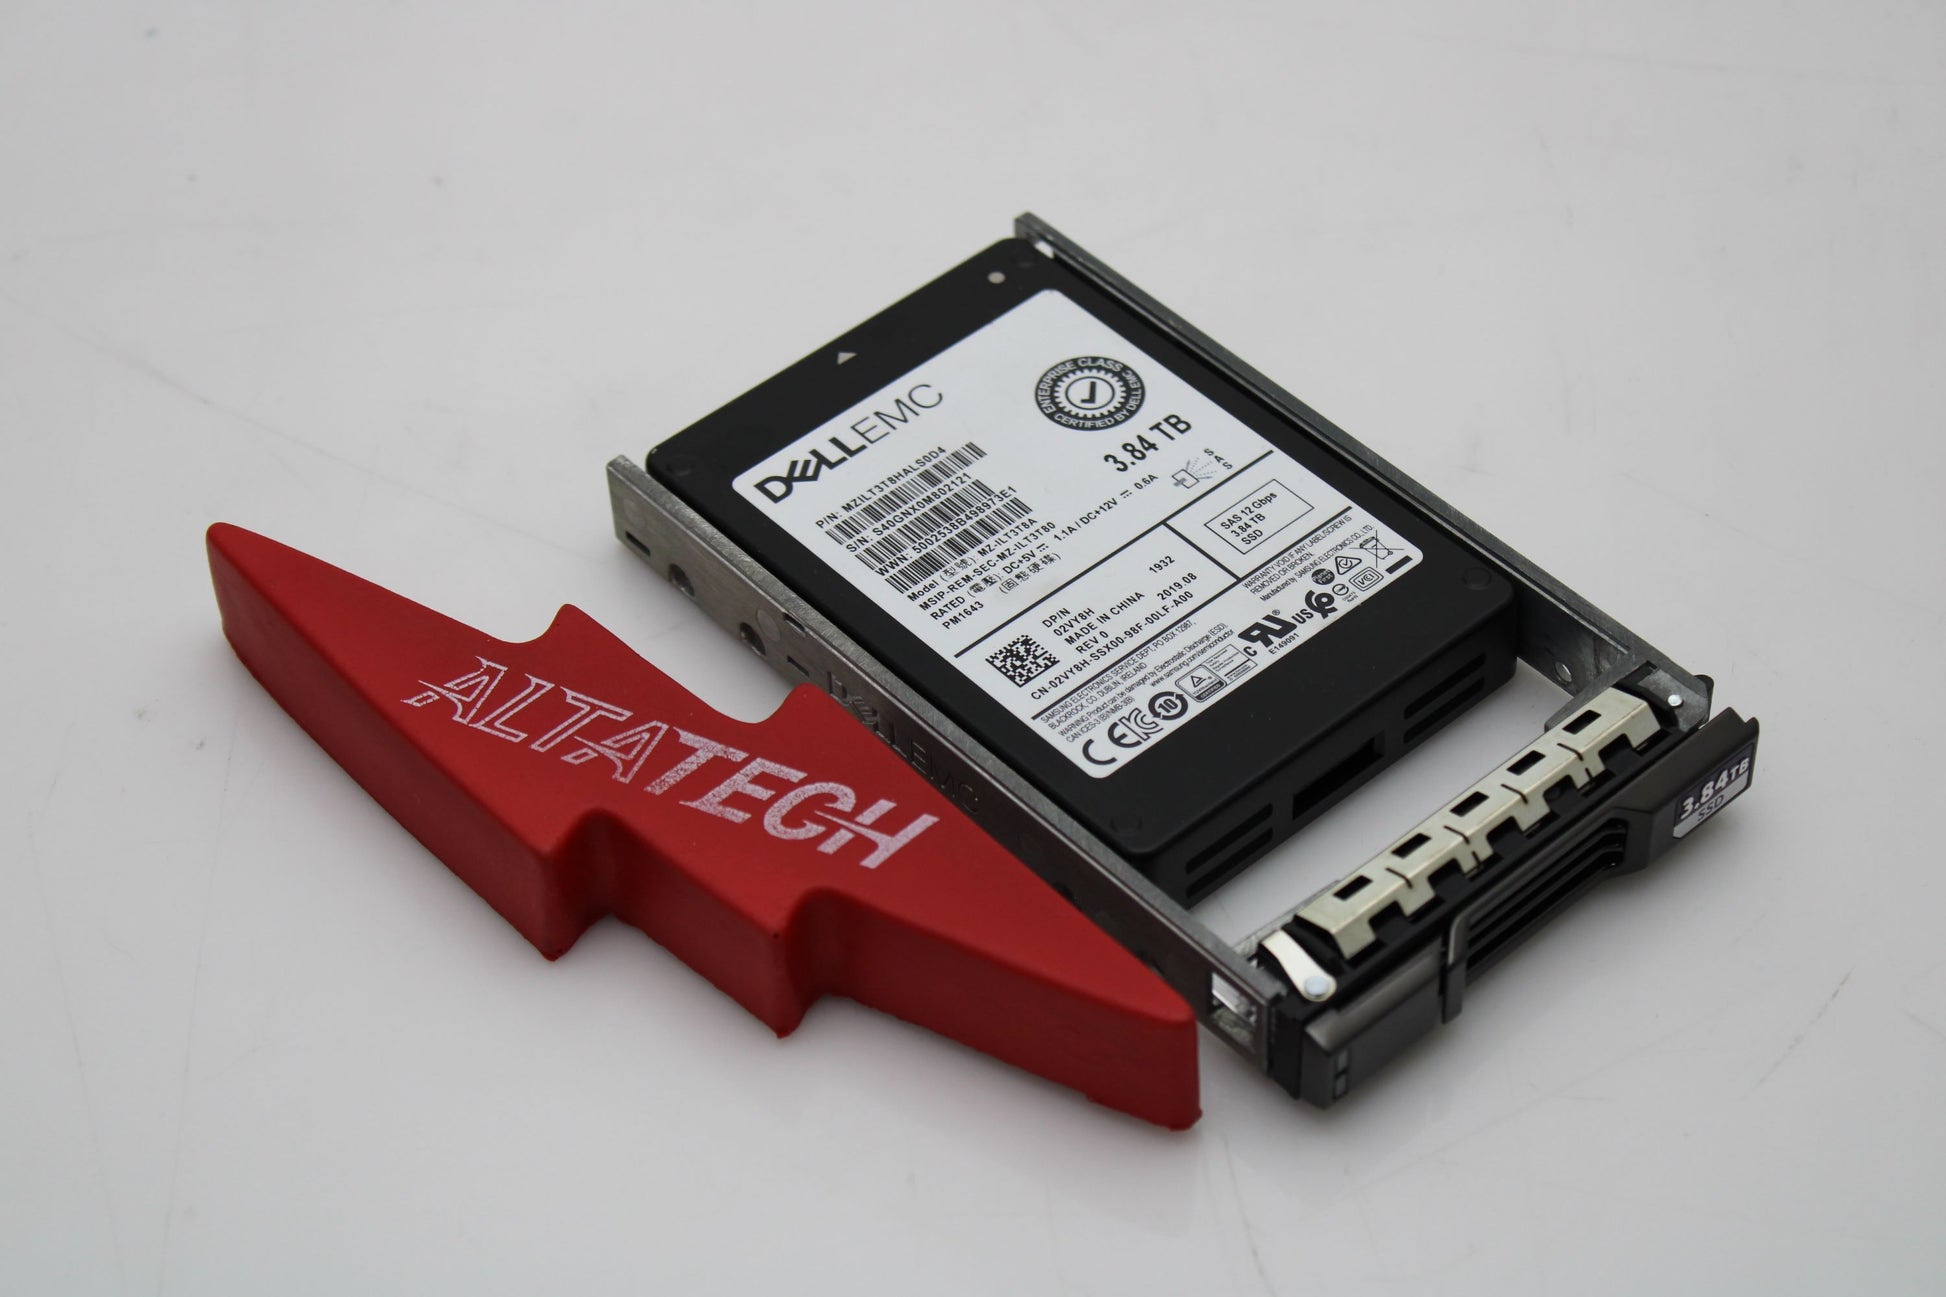 Dell 2VY8H-CML 3.84TB SSD SAS 2.5 12G E+, Used